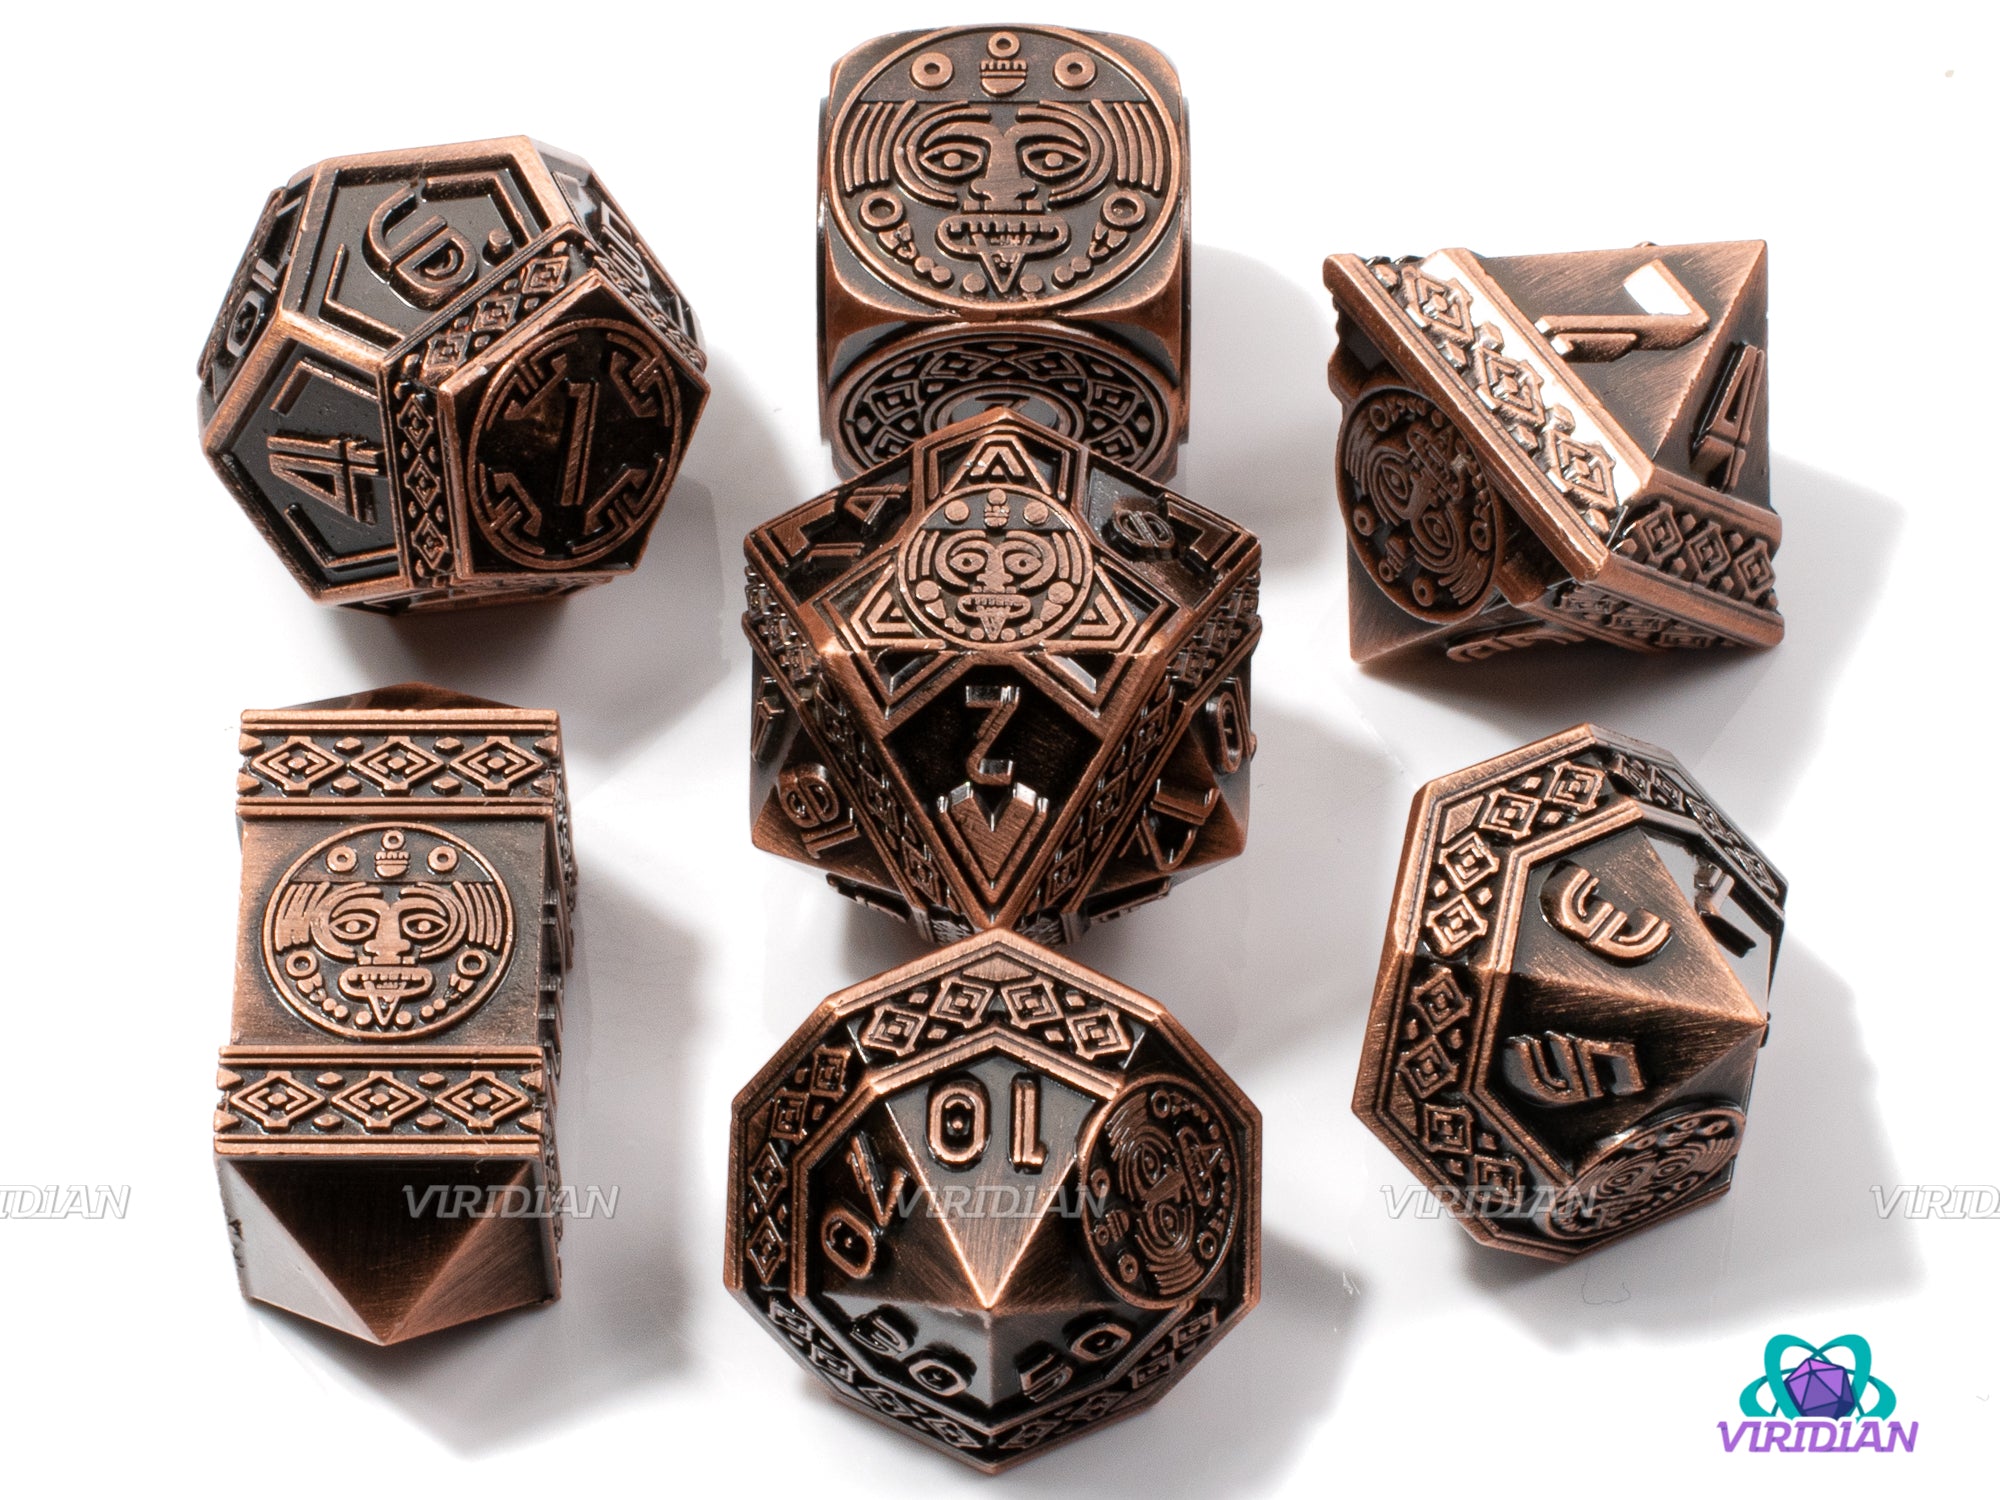 The Altar | Copper Red-Brown | Aztec Ancient Civilization Style | Metal Dice Set (7)